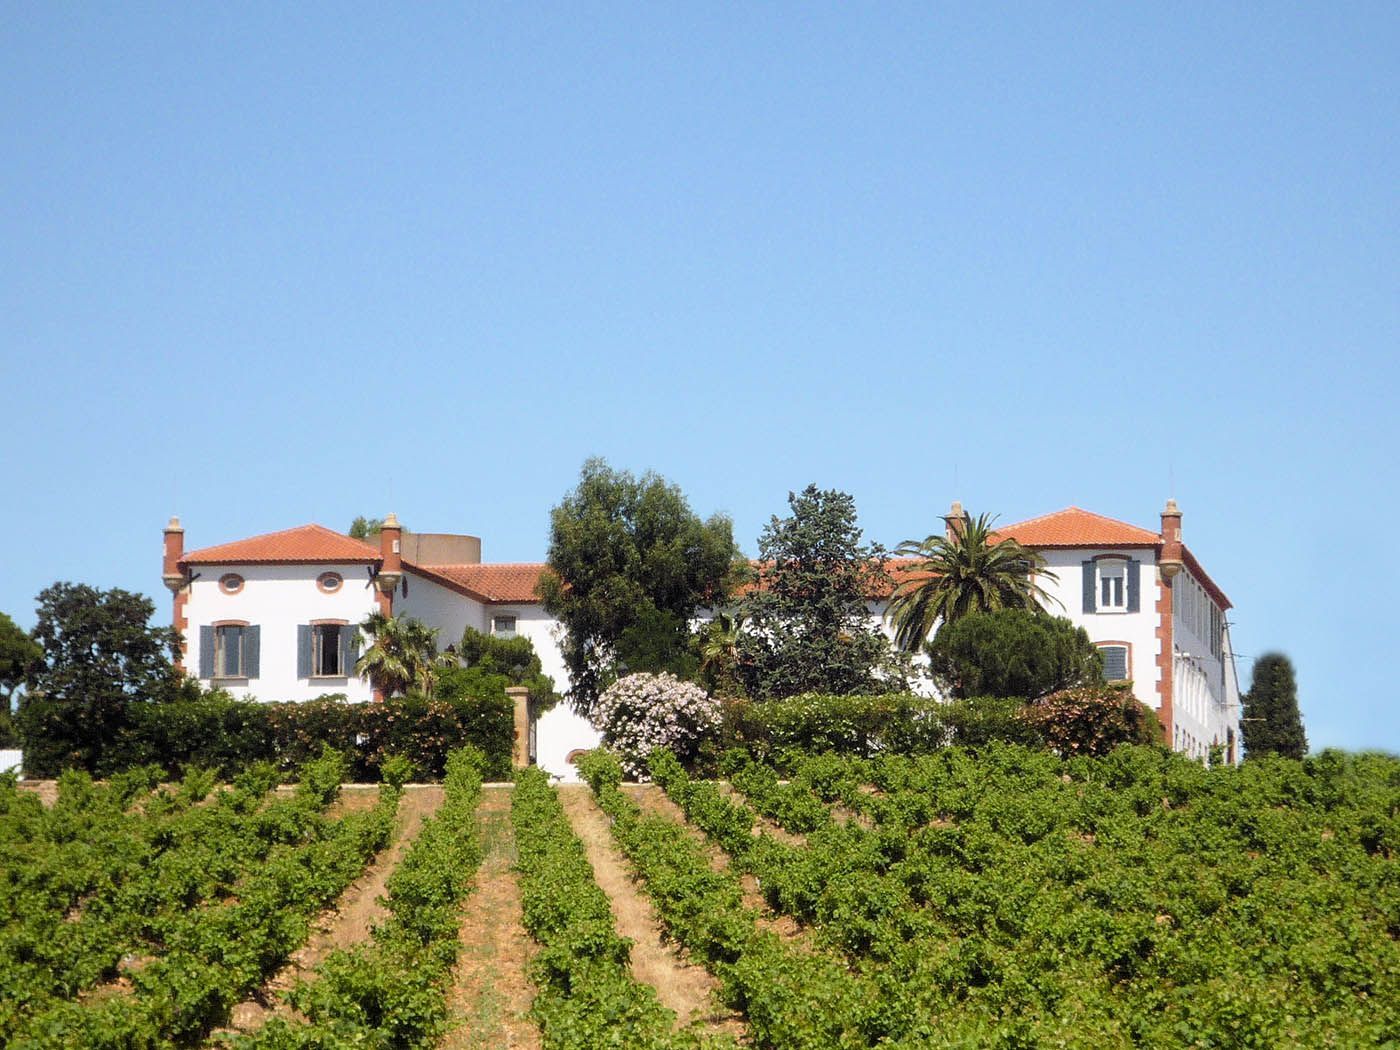 Viticultural property's view